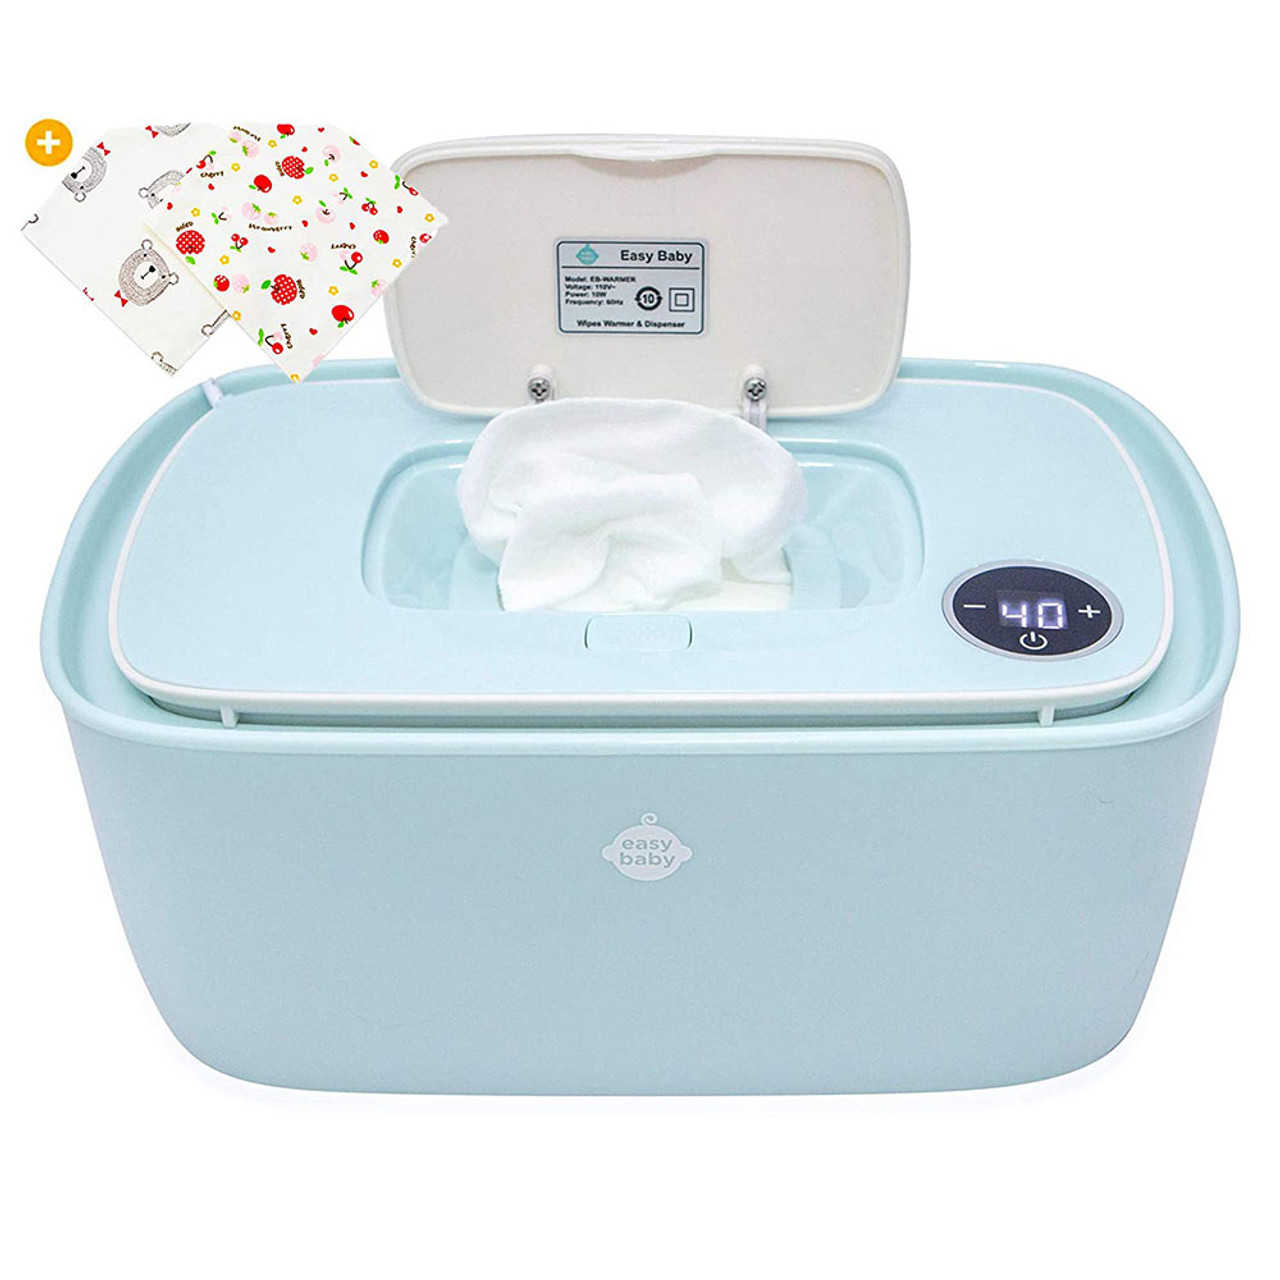 Easy Baby® Easy Wipes Warmer Dispenser product image